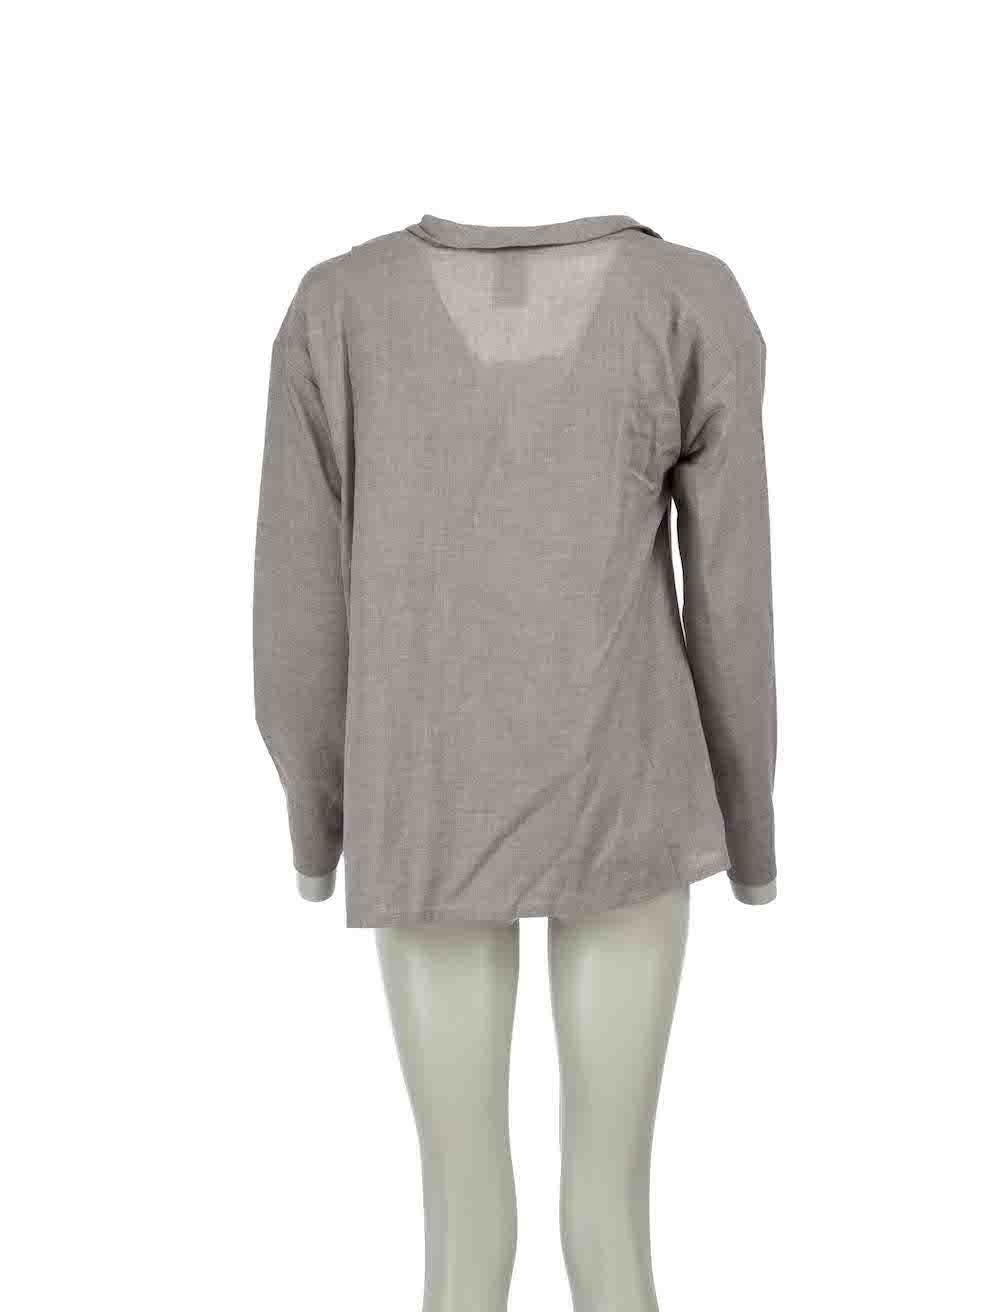 Chloé Grey Long Sleeve Ruffle Neck Top Size M In Excellent Condition For Sale In London, GB